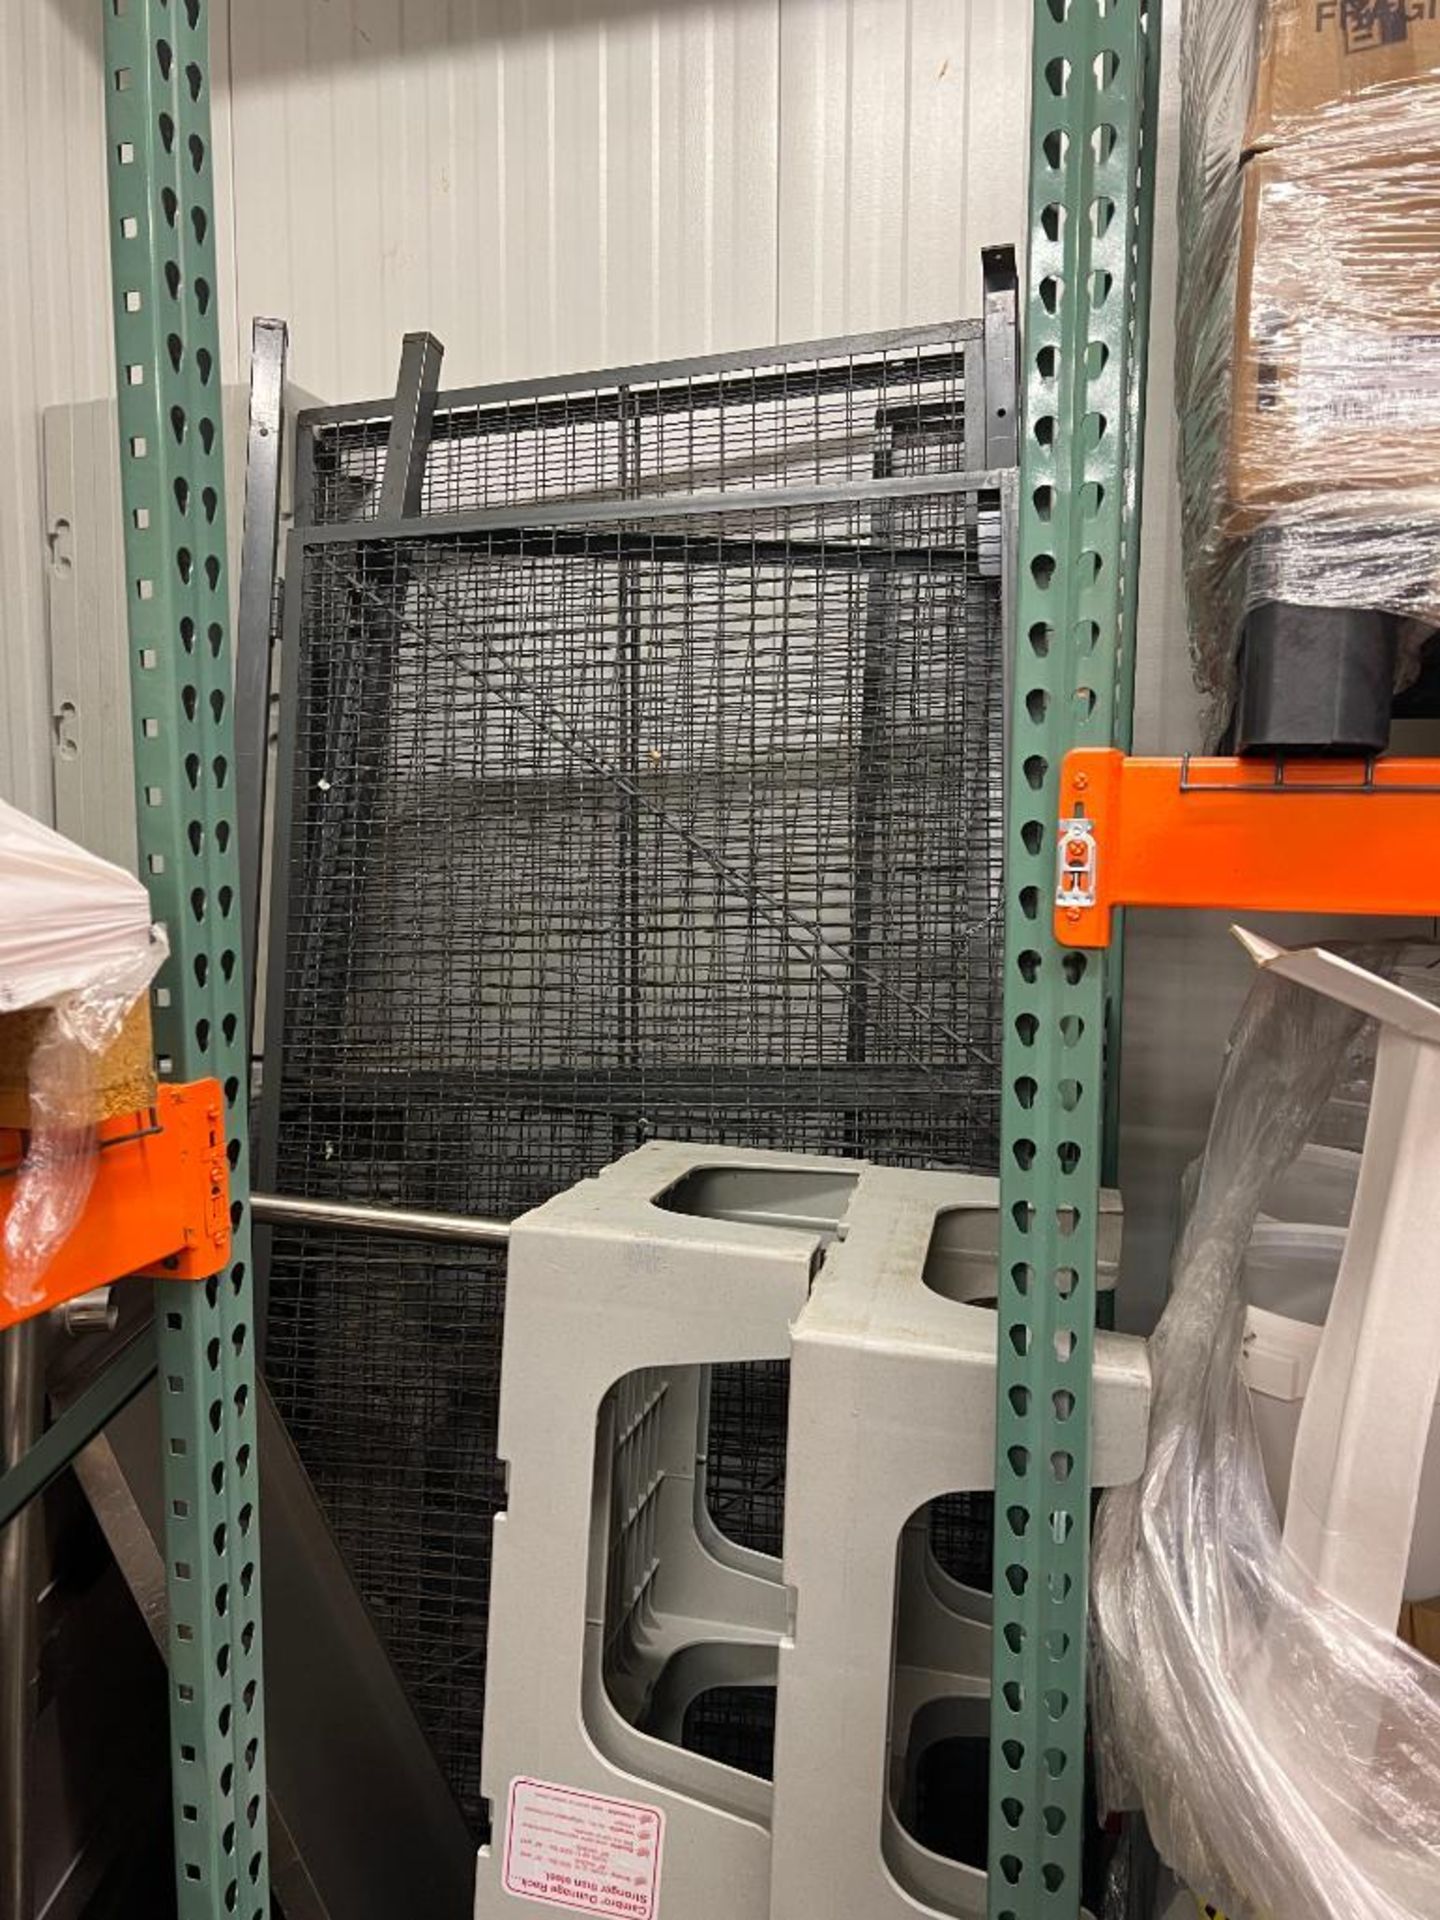 100" x 52" x 101" Chemical Cages - Image 2 of 2